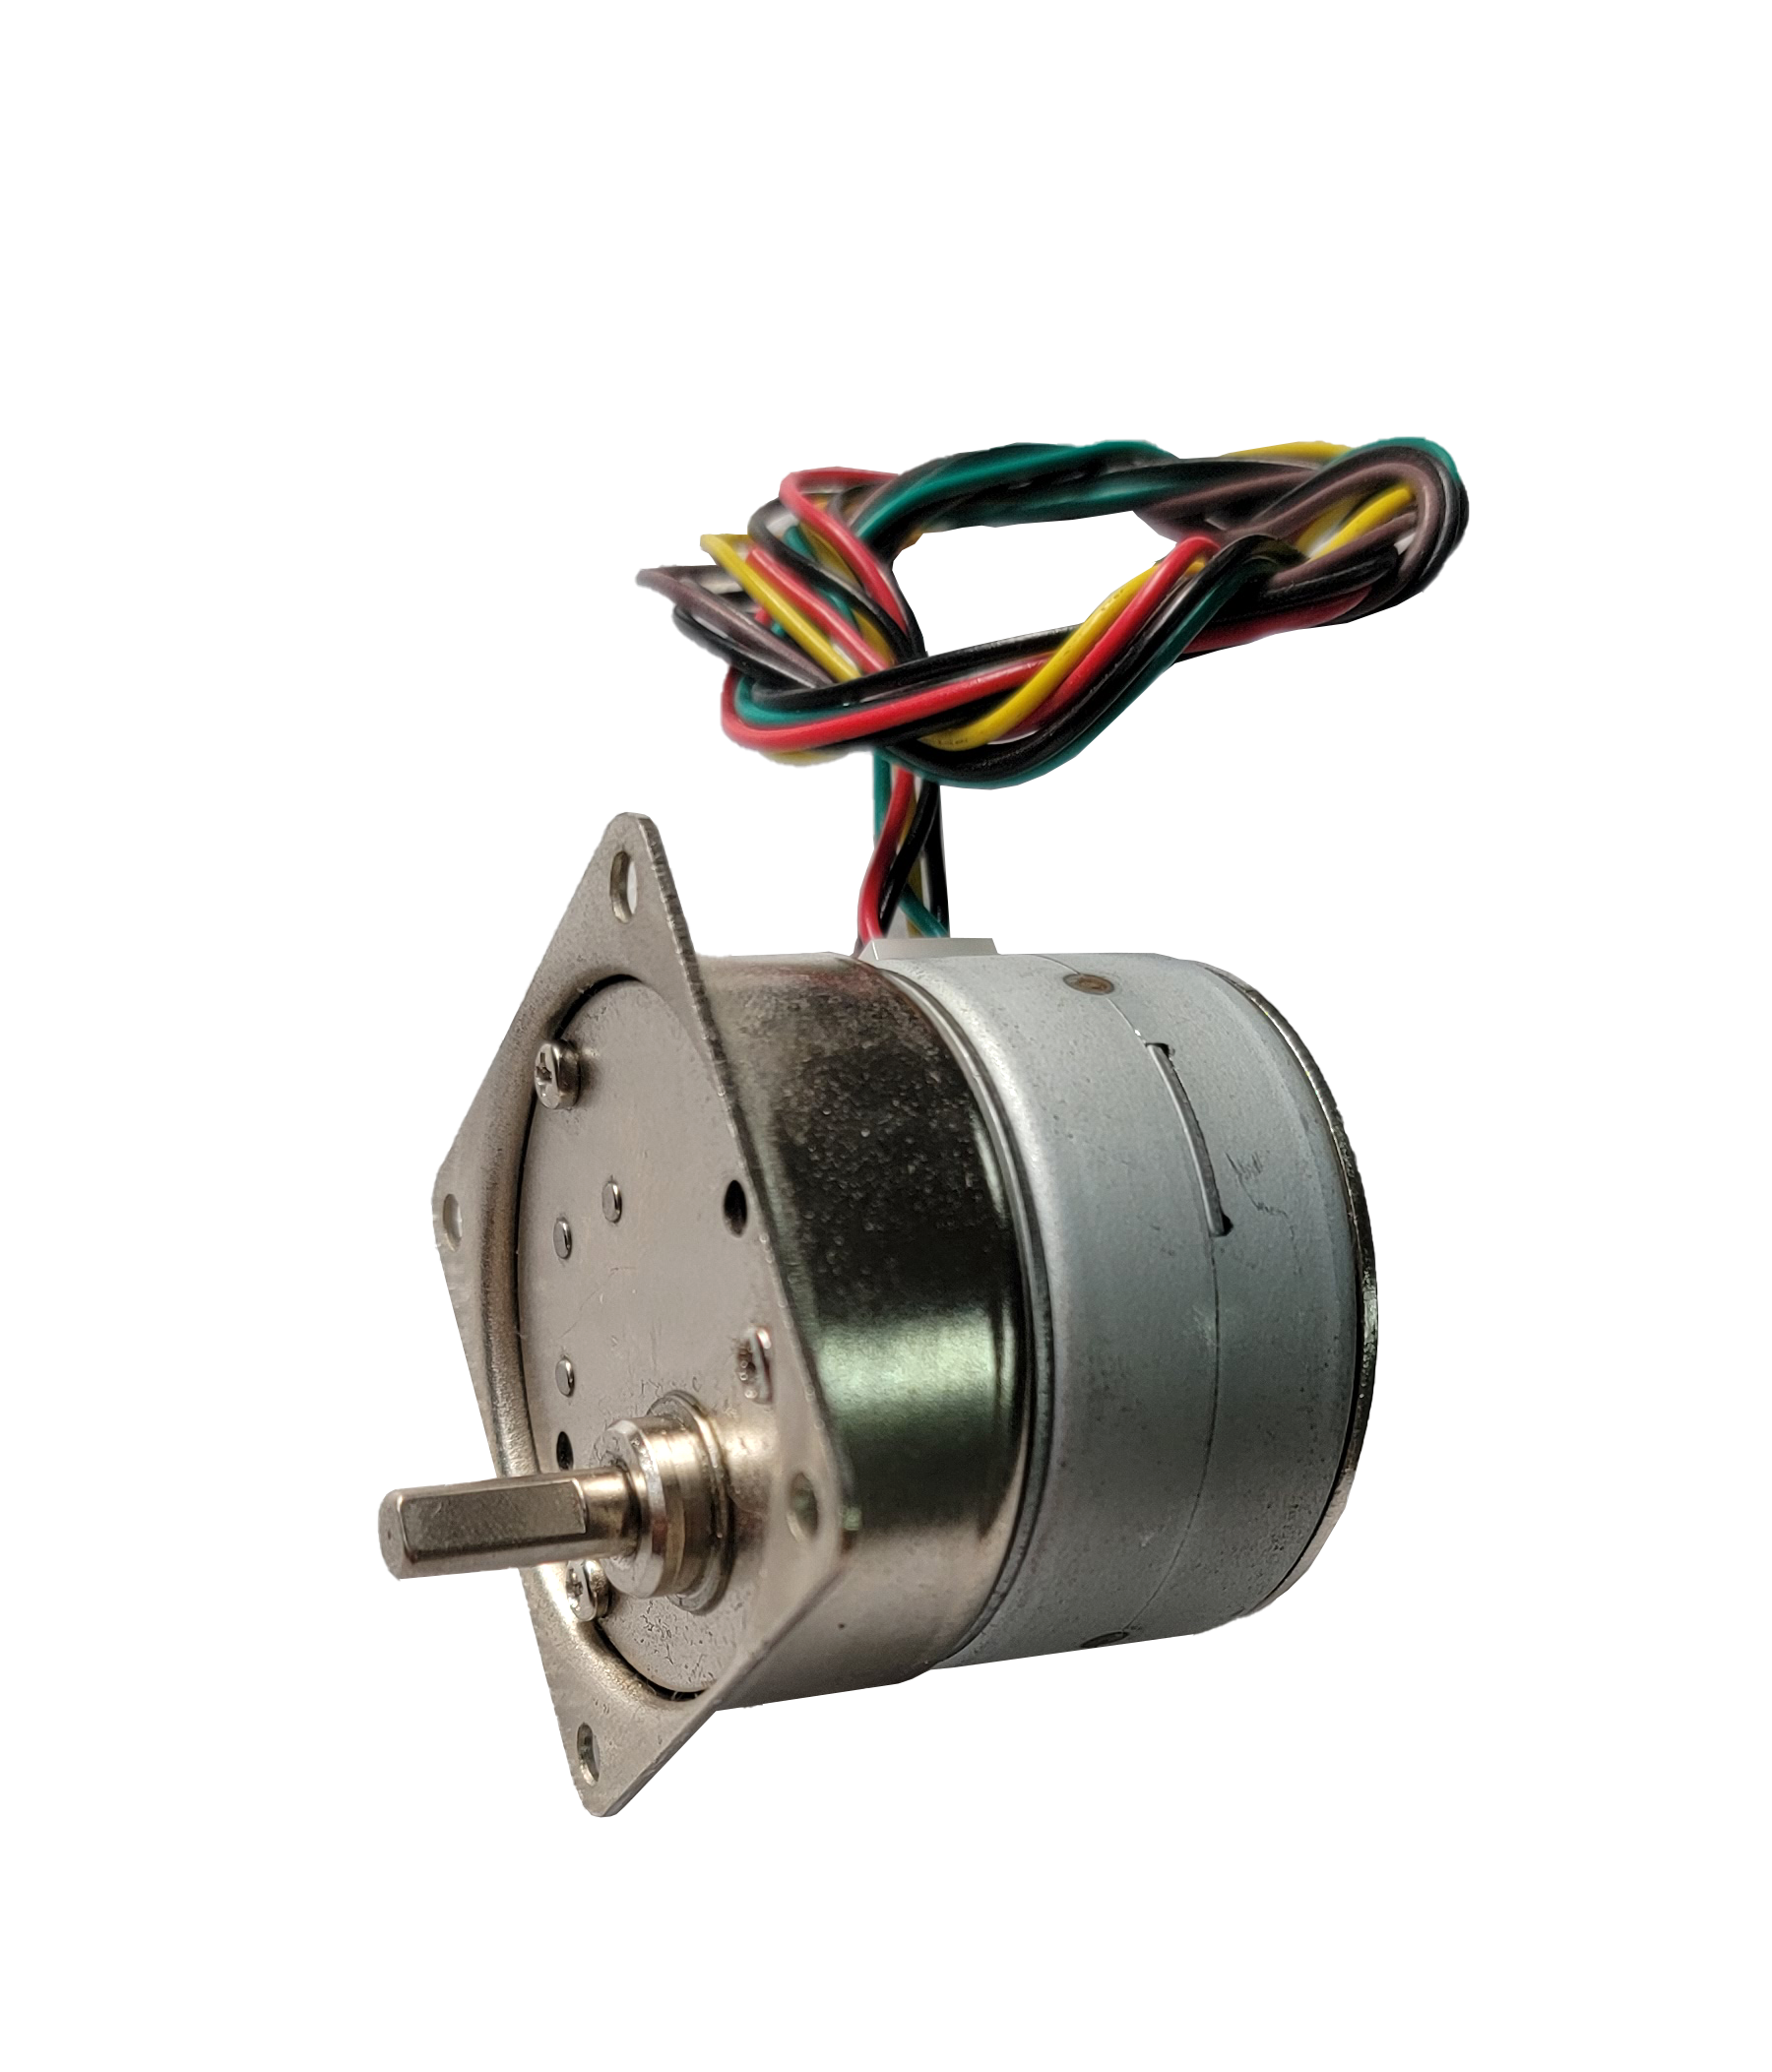 Right Angle Motor Supplier –  7.5 ° geared stepper motor from Shenzhen manufacturer with quality price & service – Bobet